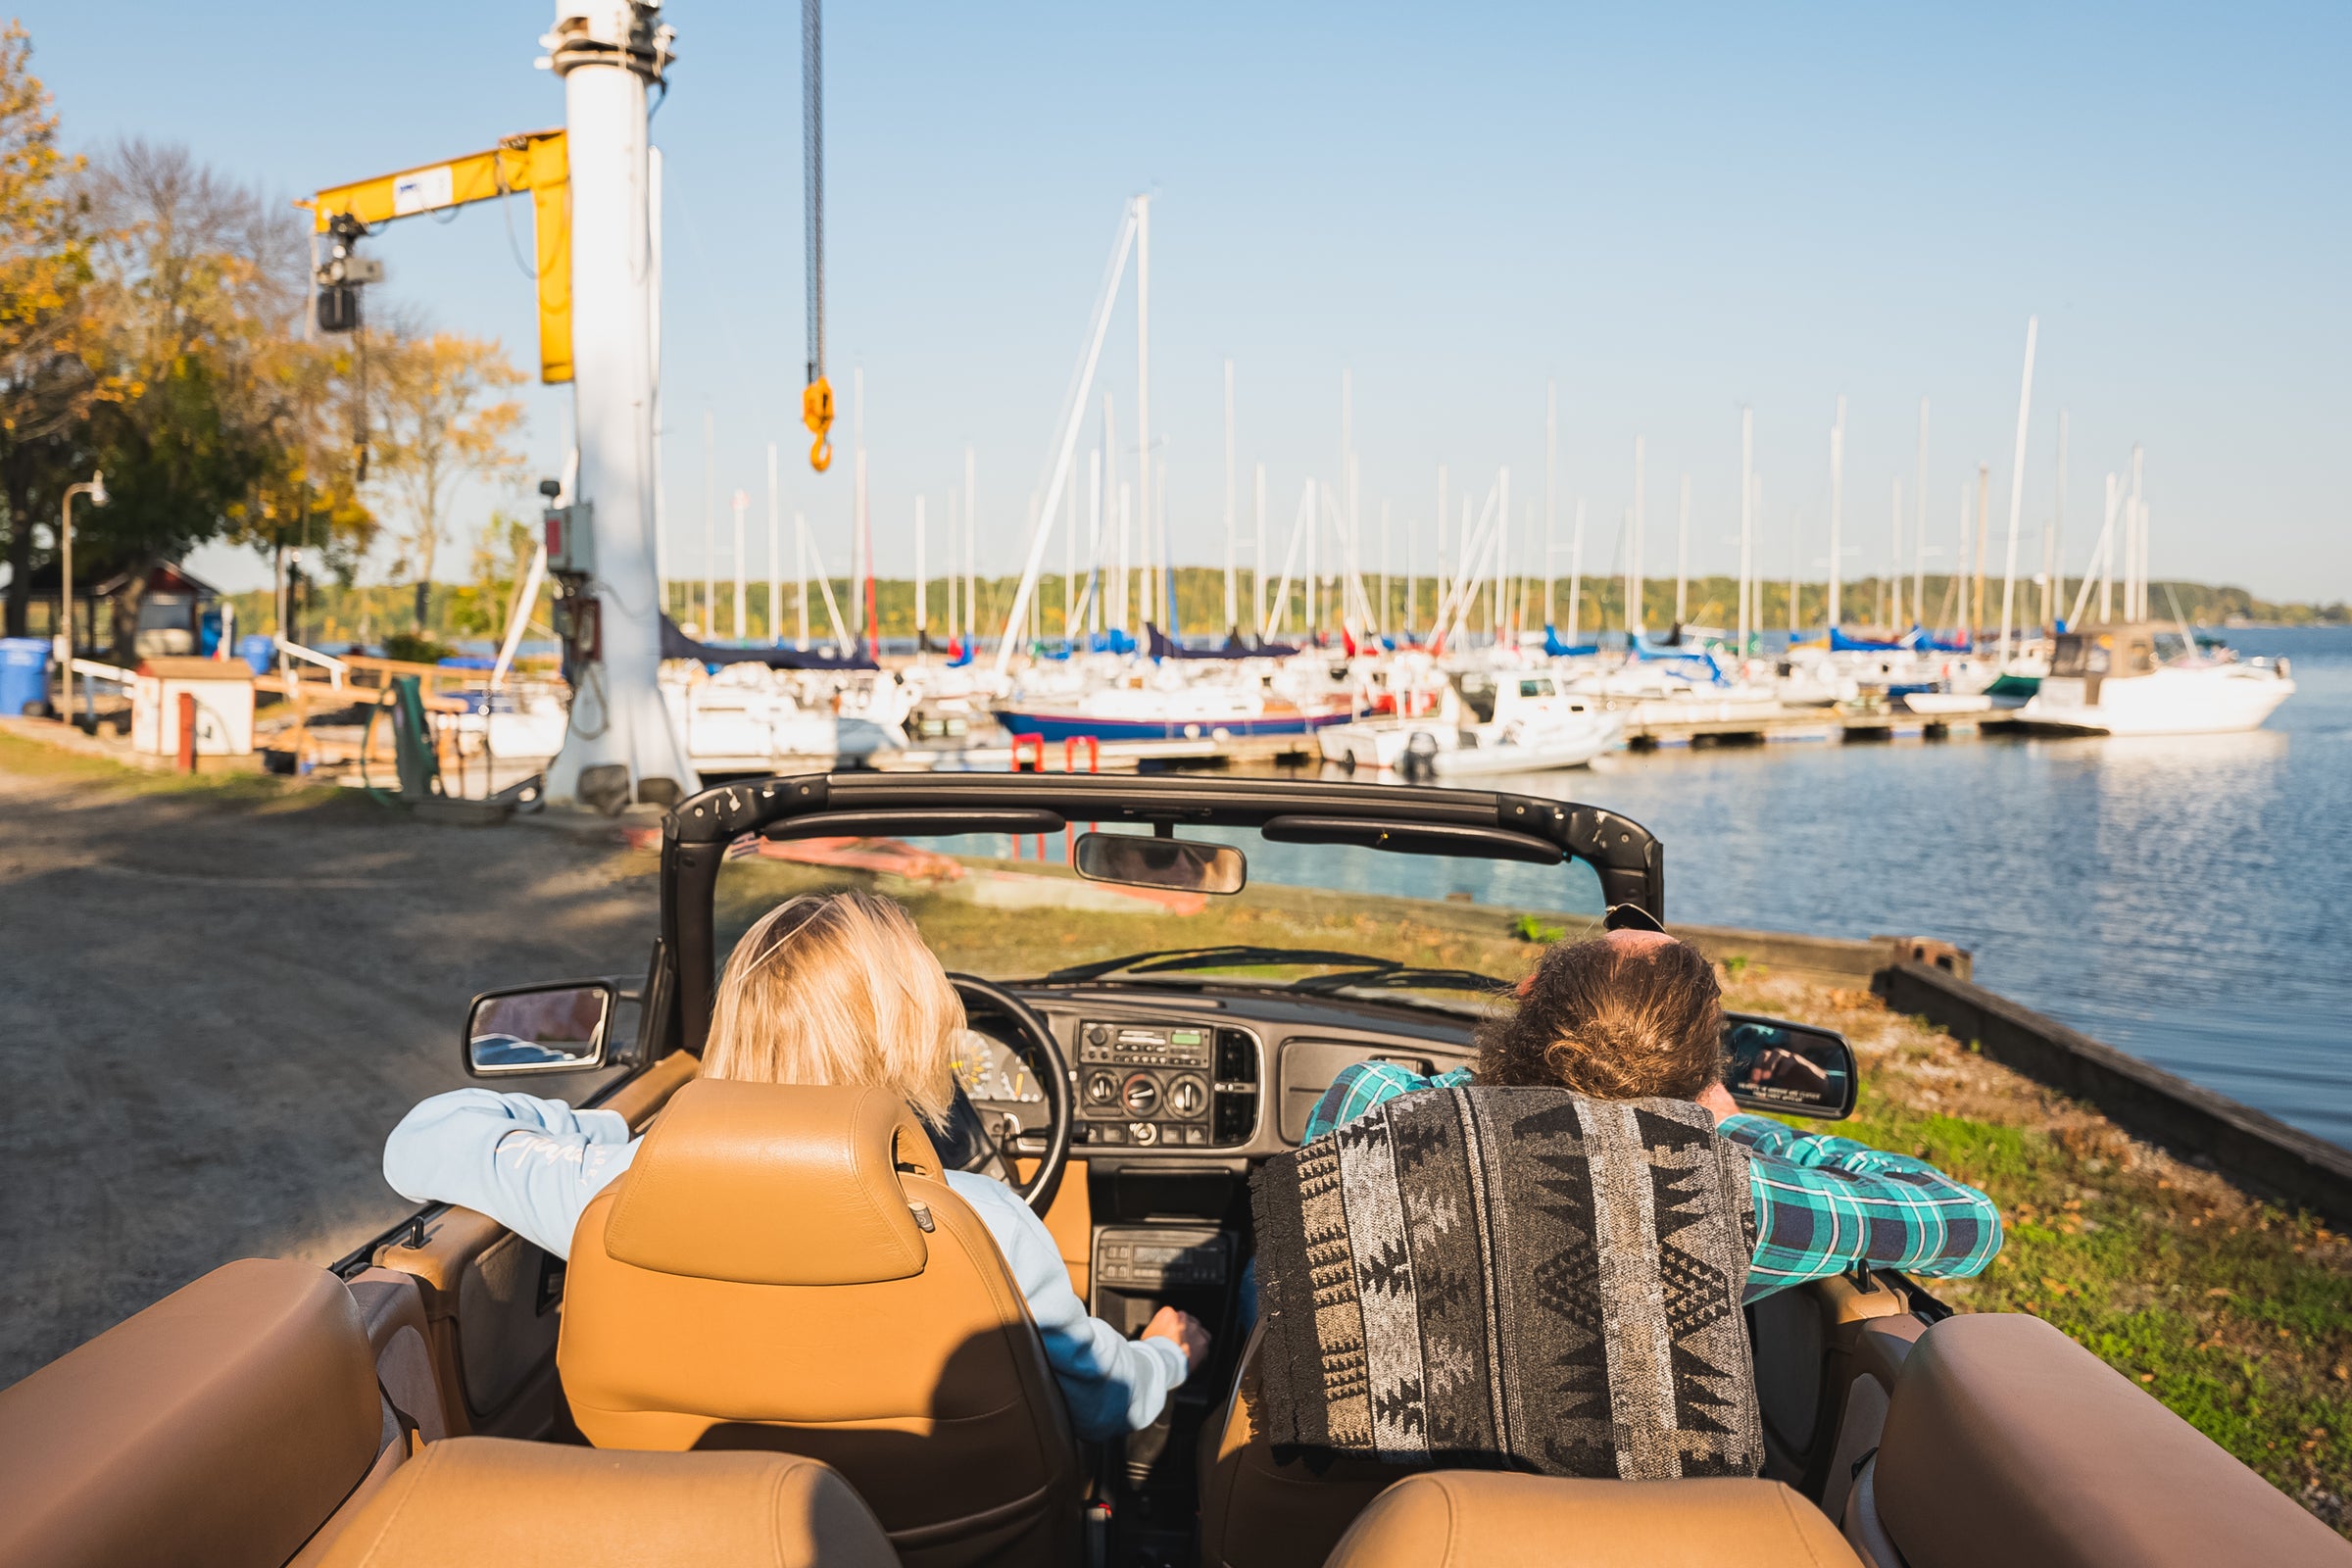 Two people in a convertible facing a dock with a lot of sailing boats.